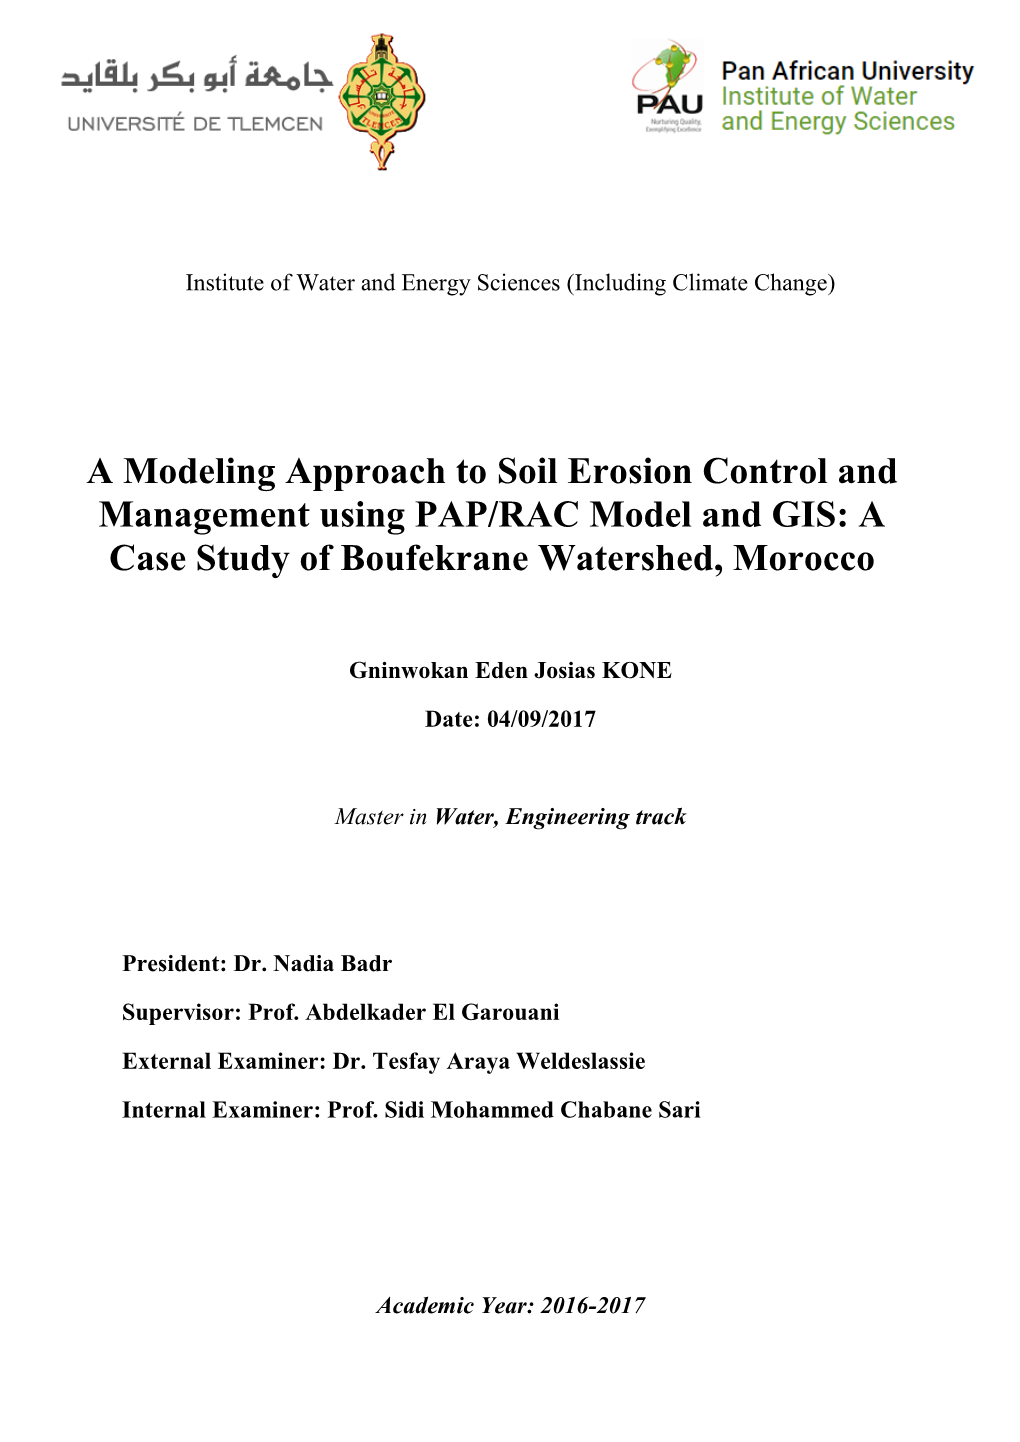 A Modeling Approach to Soil Erosion Control and Management Using PAP/RAC Model and GIS: a Case Study of Boufekrane Watershed, Morocco